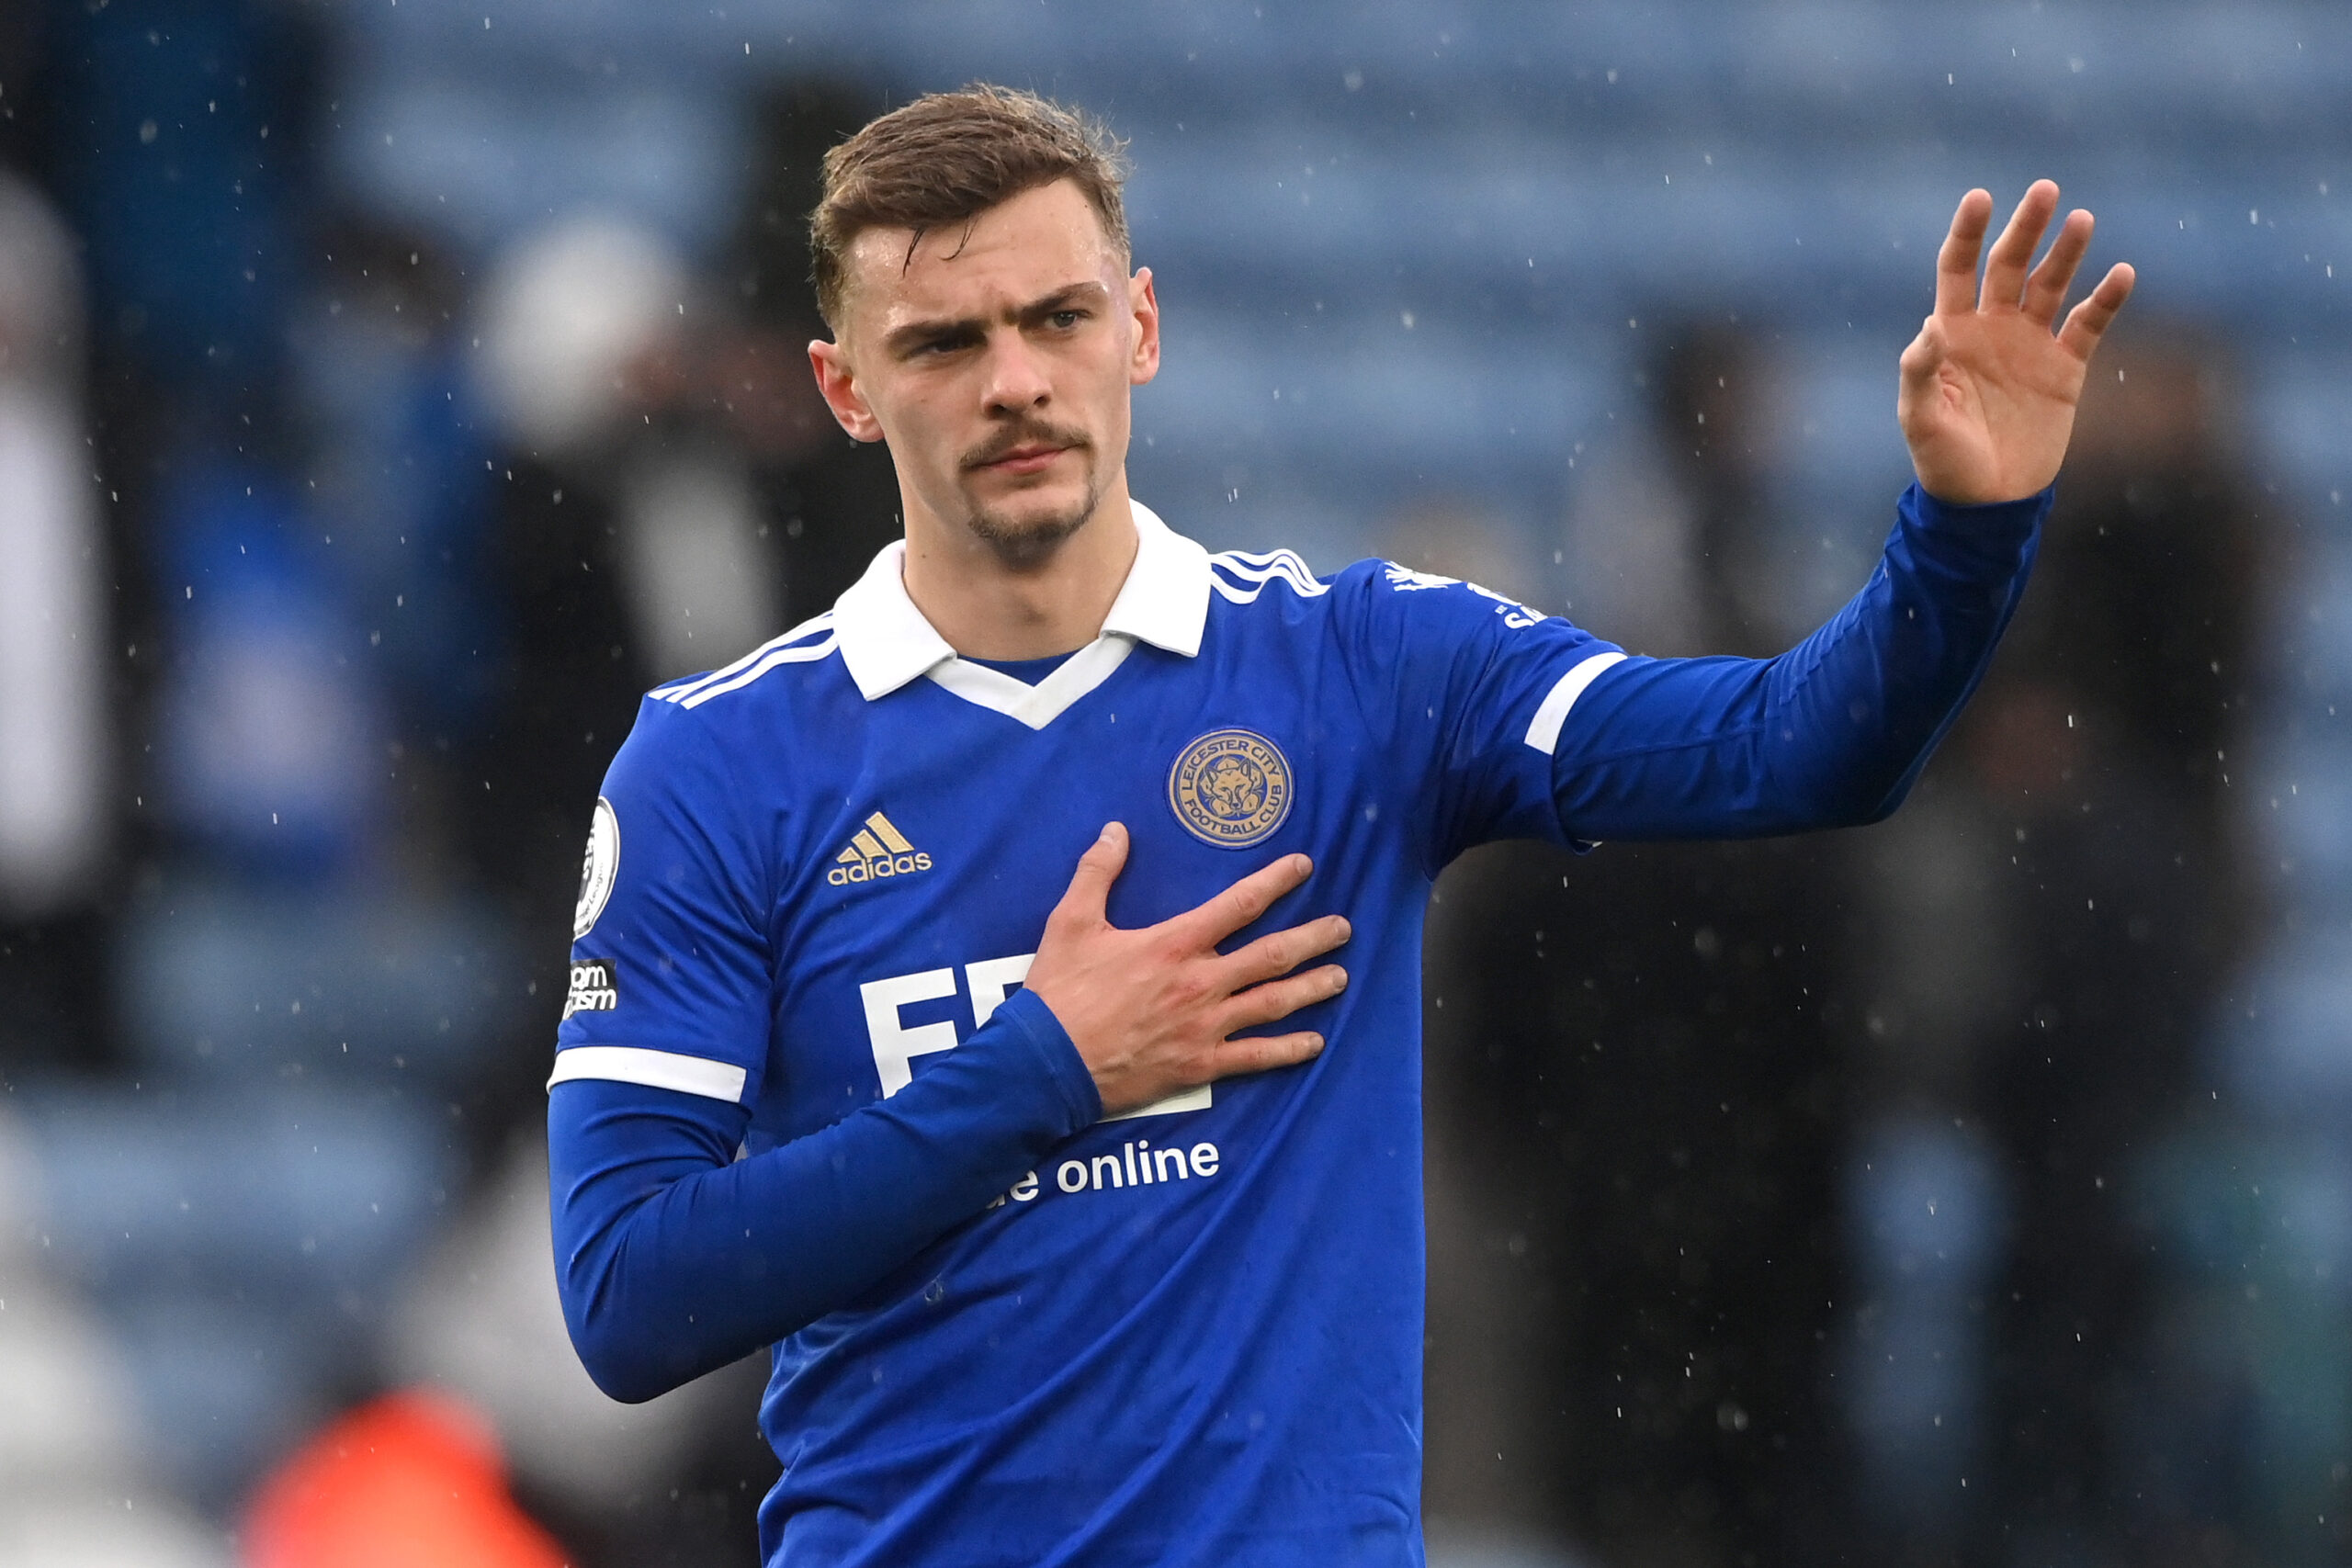 Kiernan Dewsbury-Hall of Leicester City acknowledges the fans after the team's defeat during the Premier League match between Leicester City and Chelsea FC at The King Power Stadium on March 11, 2023 in Leicester, England.